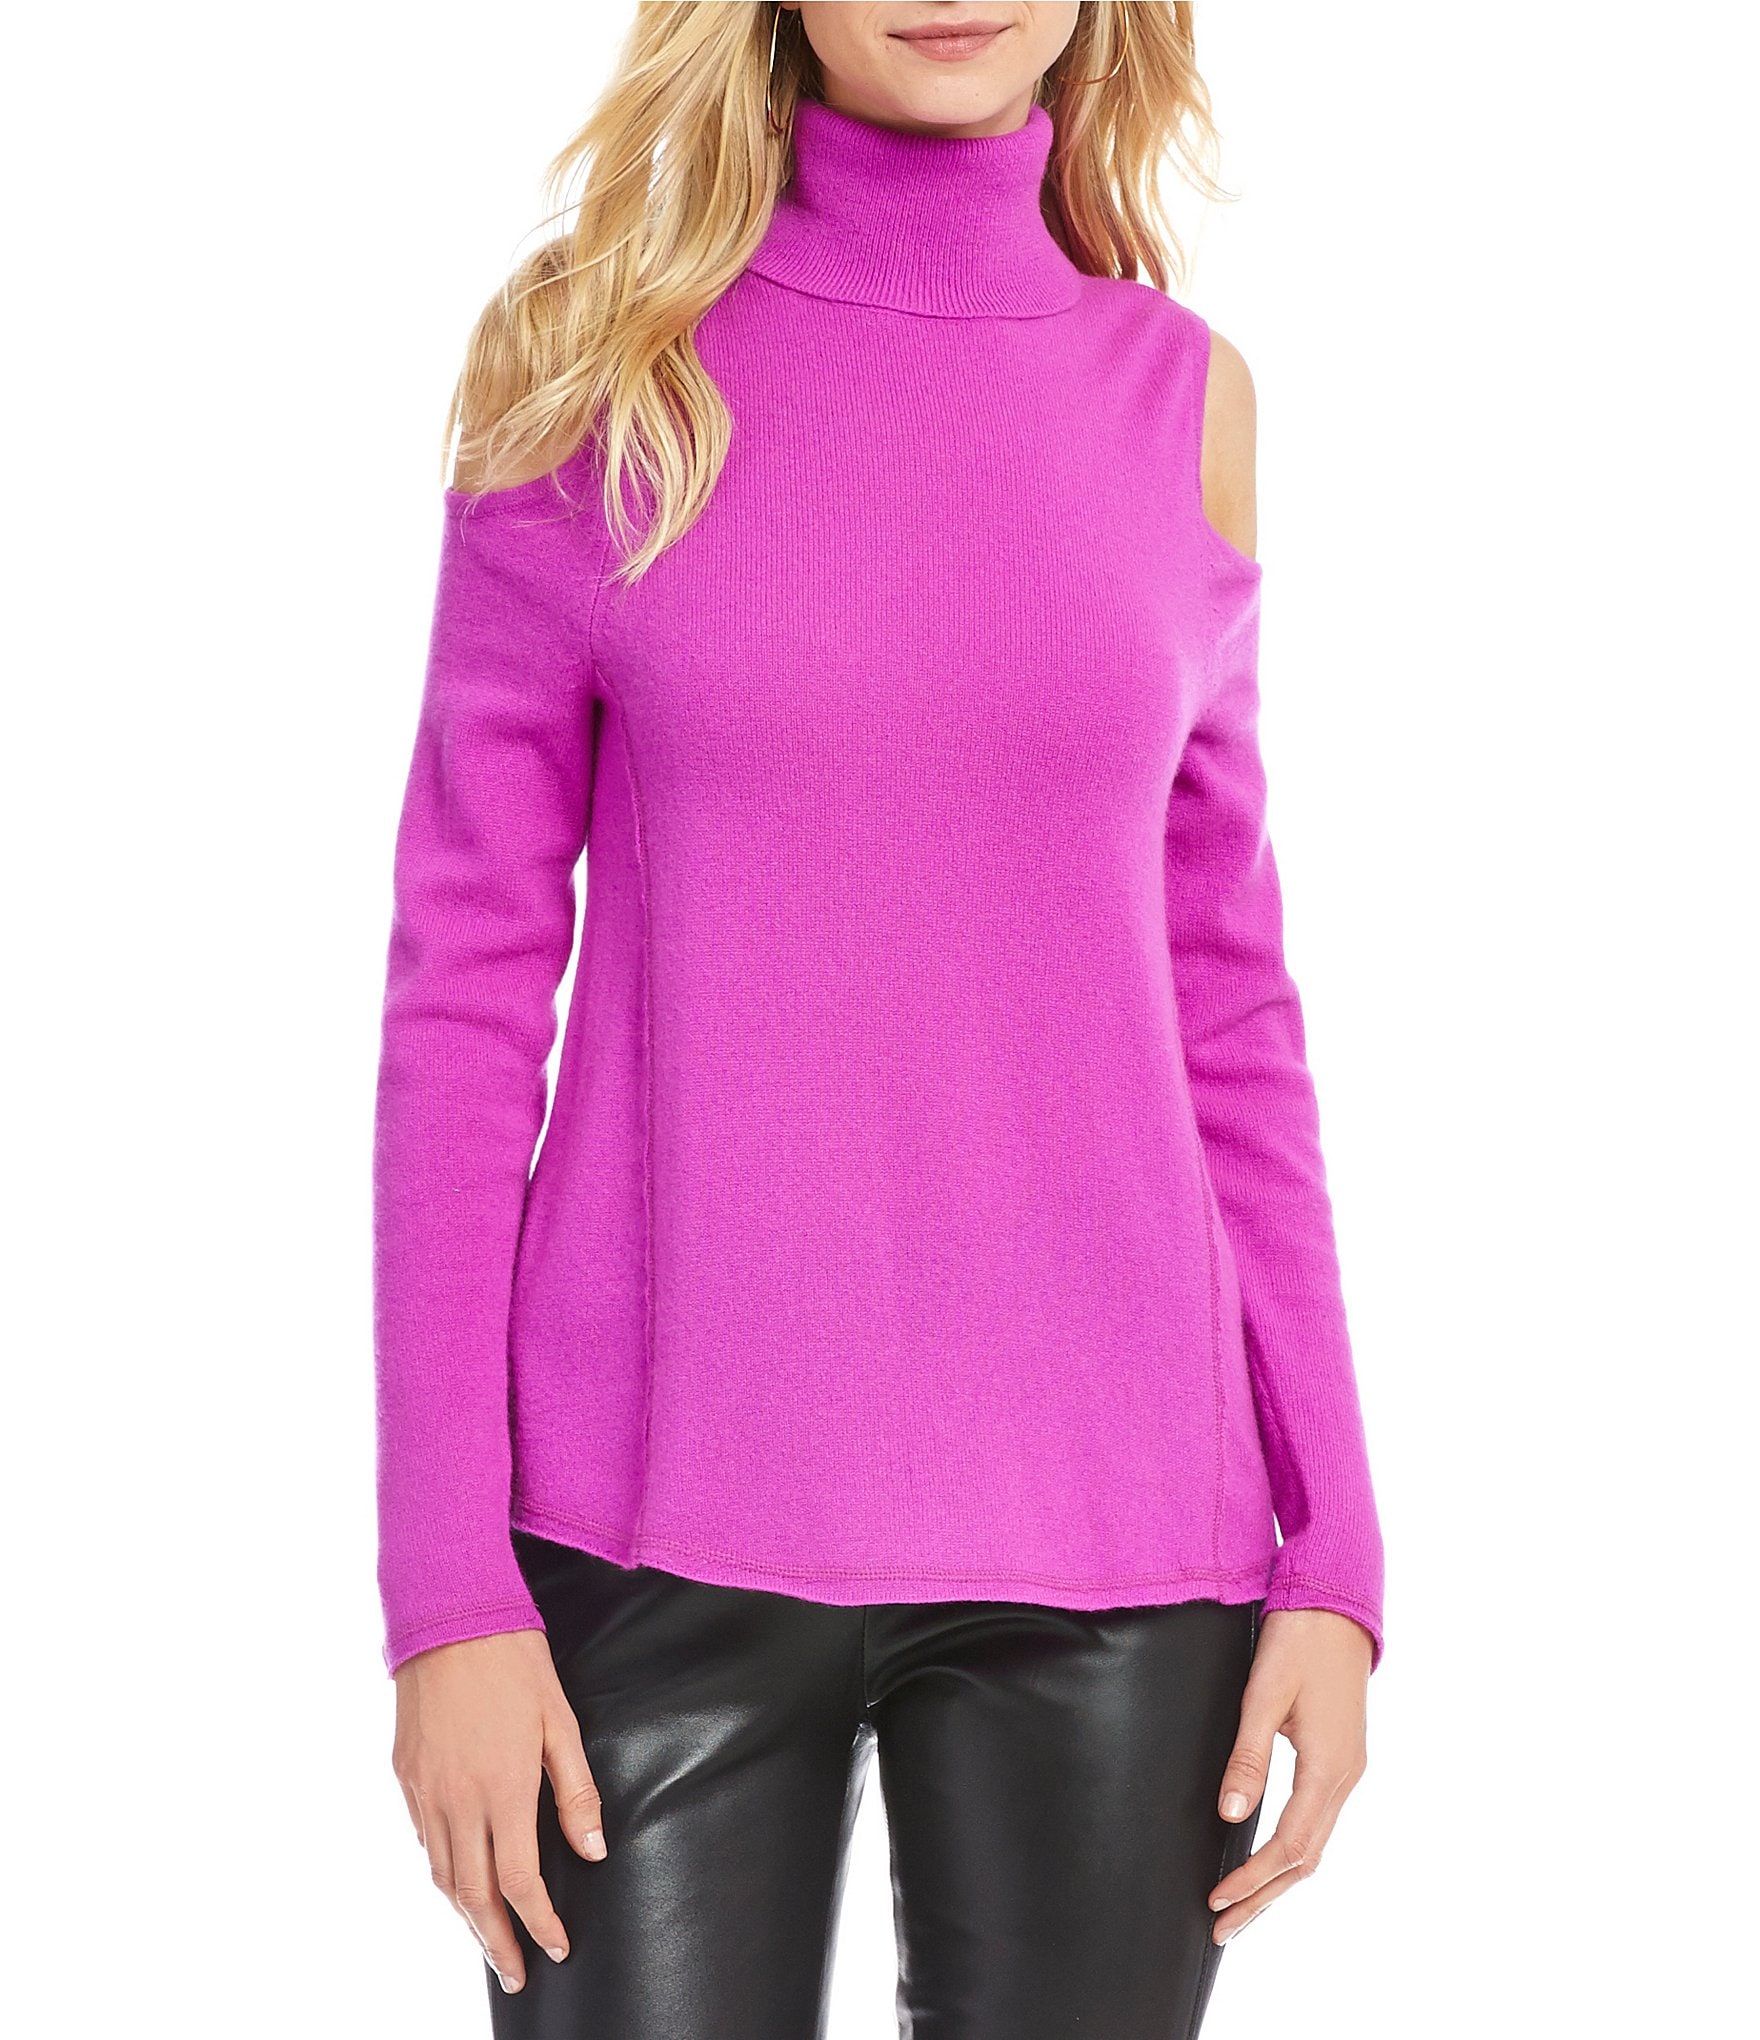 Womens cashmere sweaters in dillards